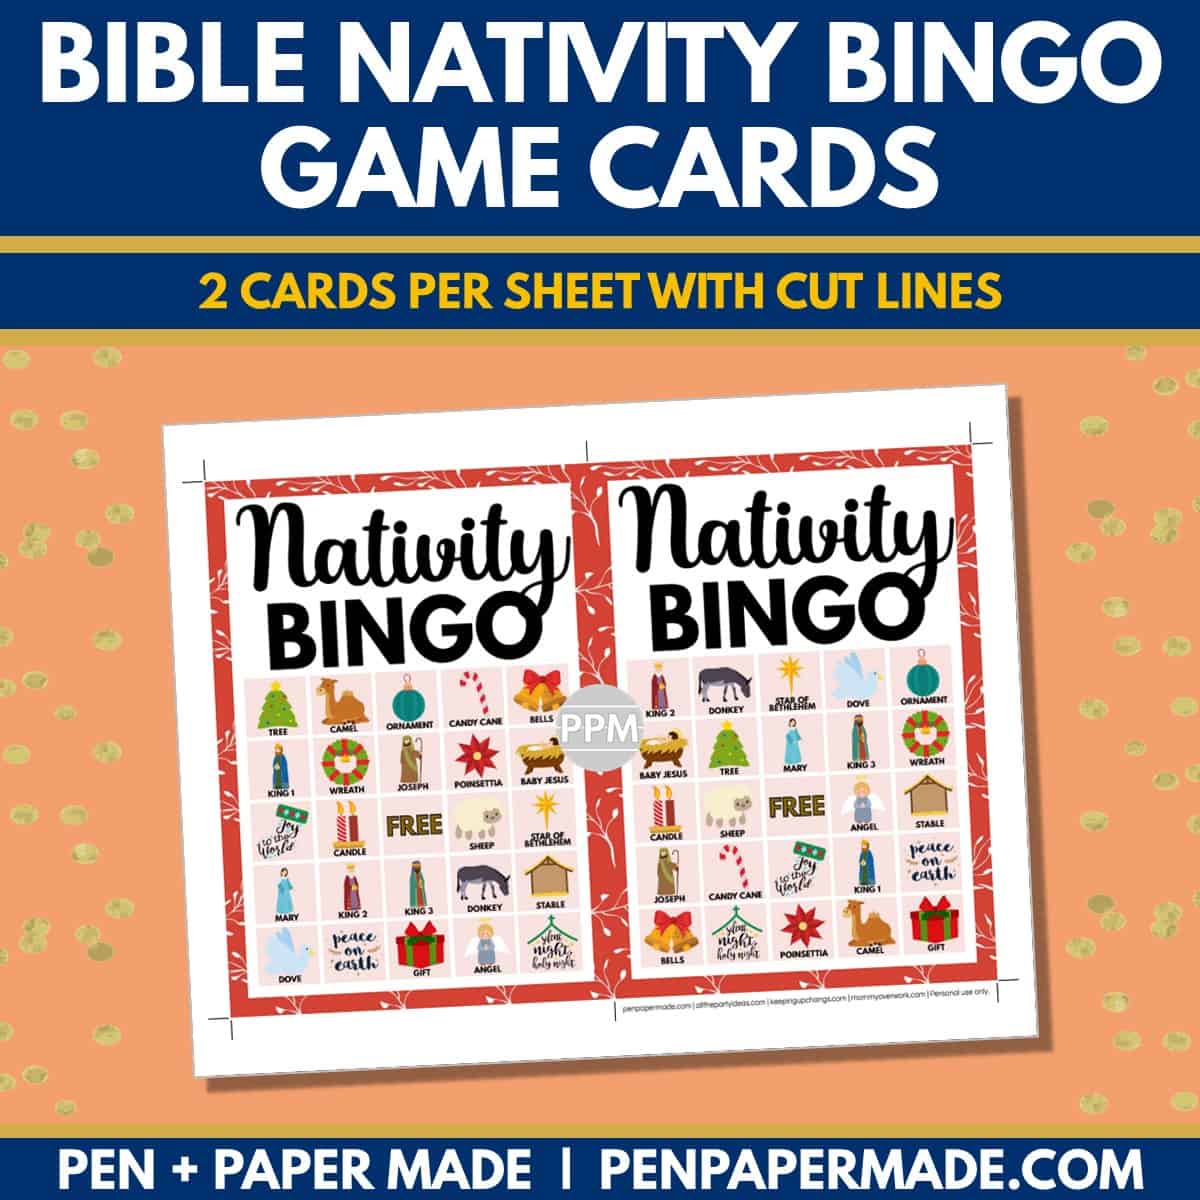 bible nativity christmas bingo card 5x5 5x7 game boards with images and text words.